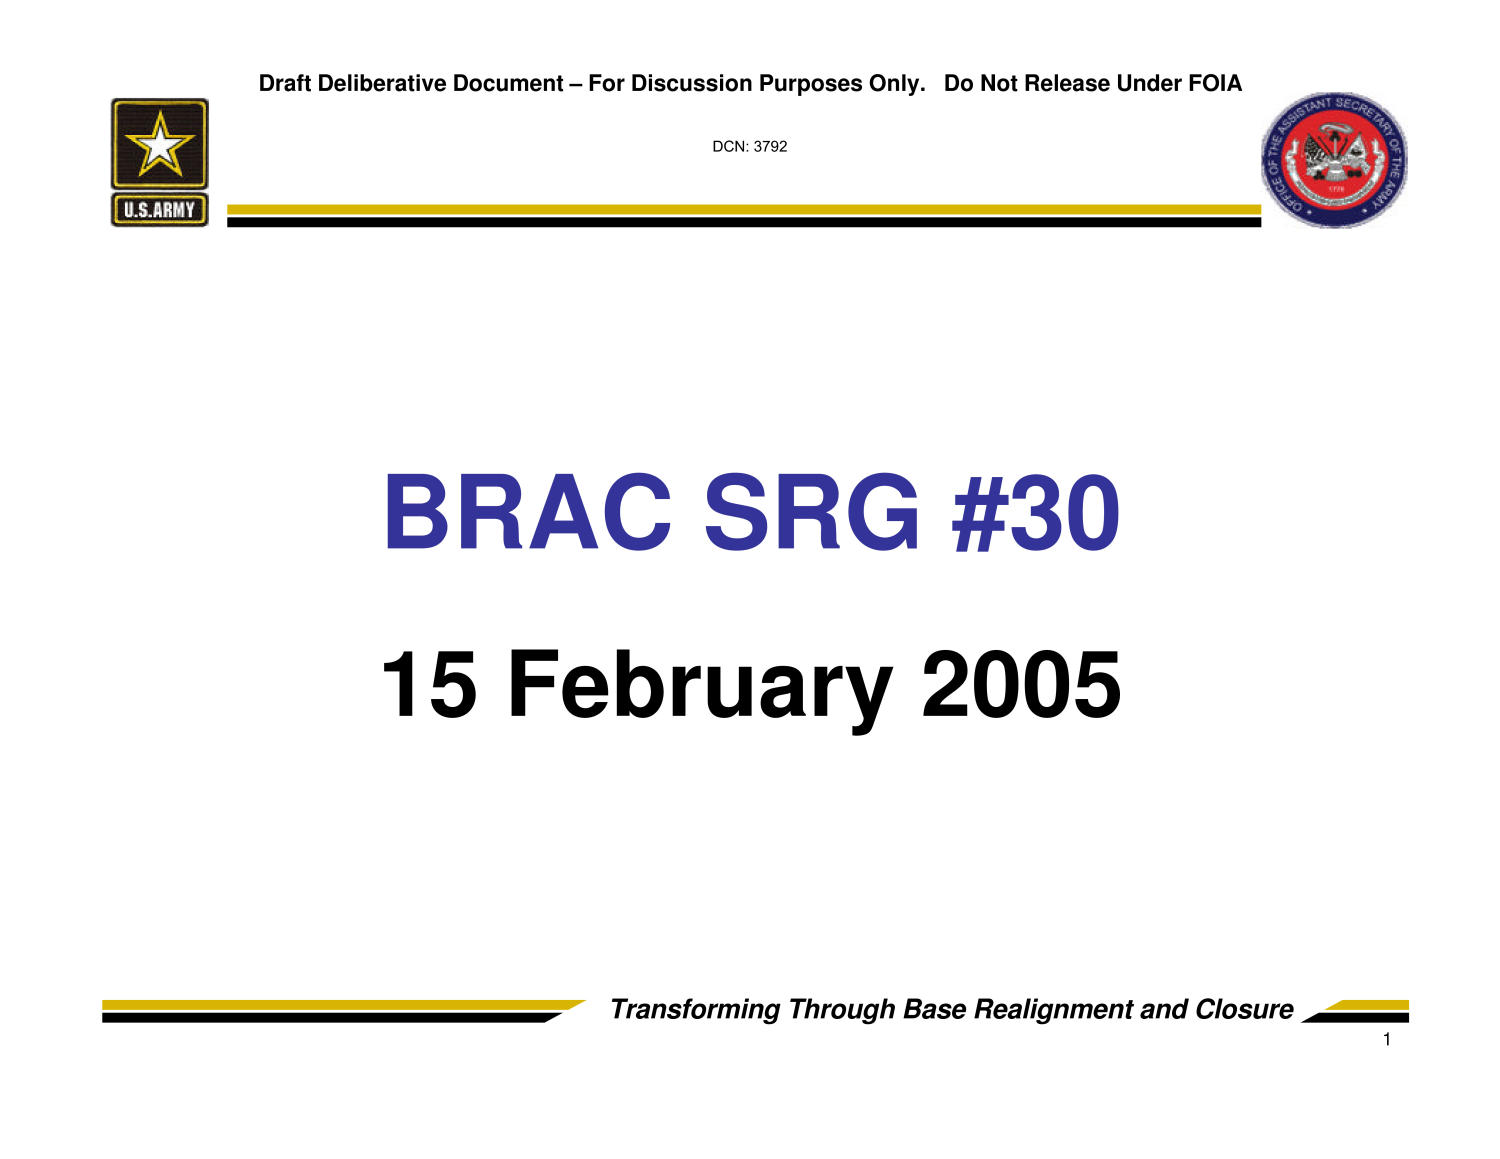 Army - Surge #30 -February 15, 2005 - Briefing and Minutes
                                                
                                                    [Sequence #]: 1 of 87
                                                